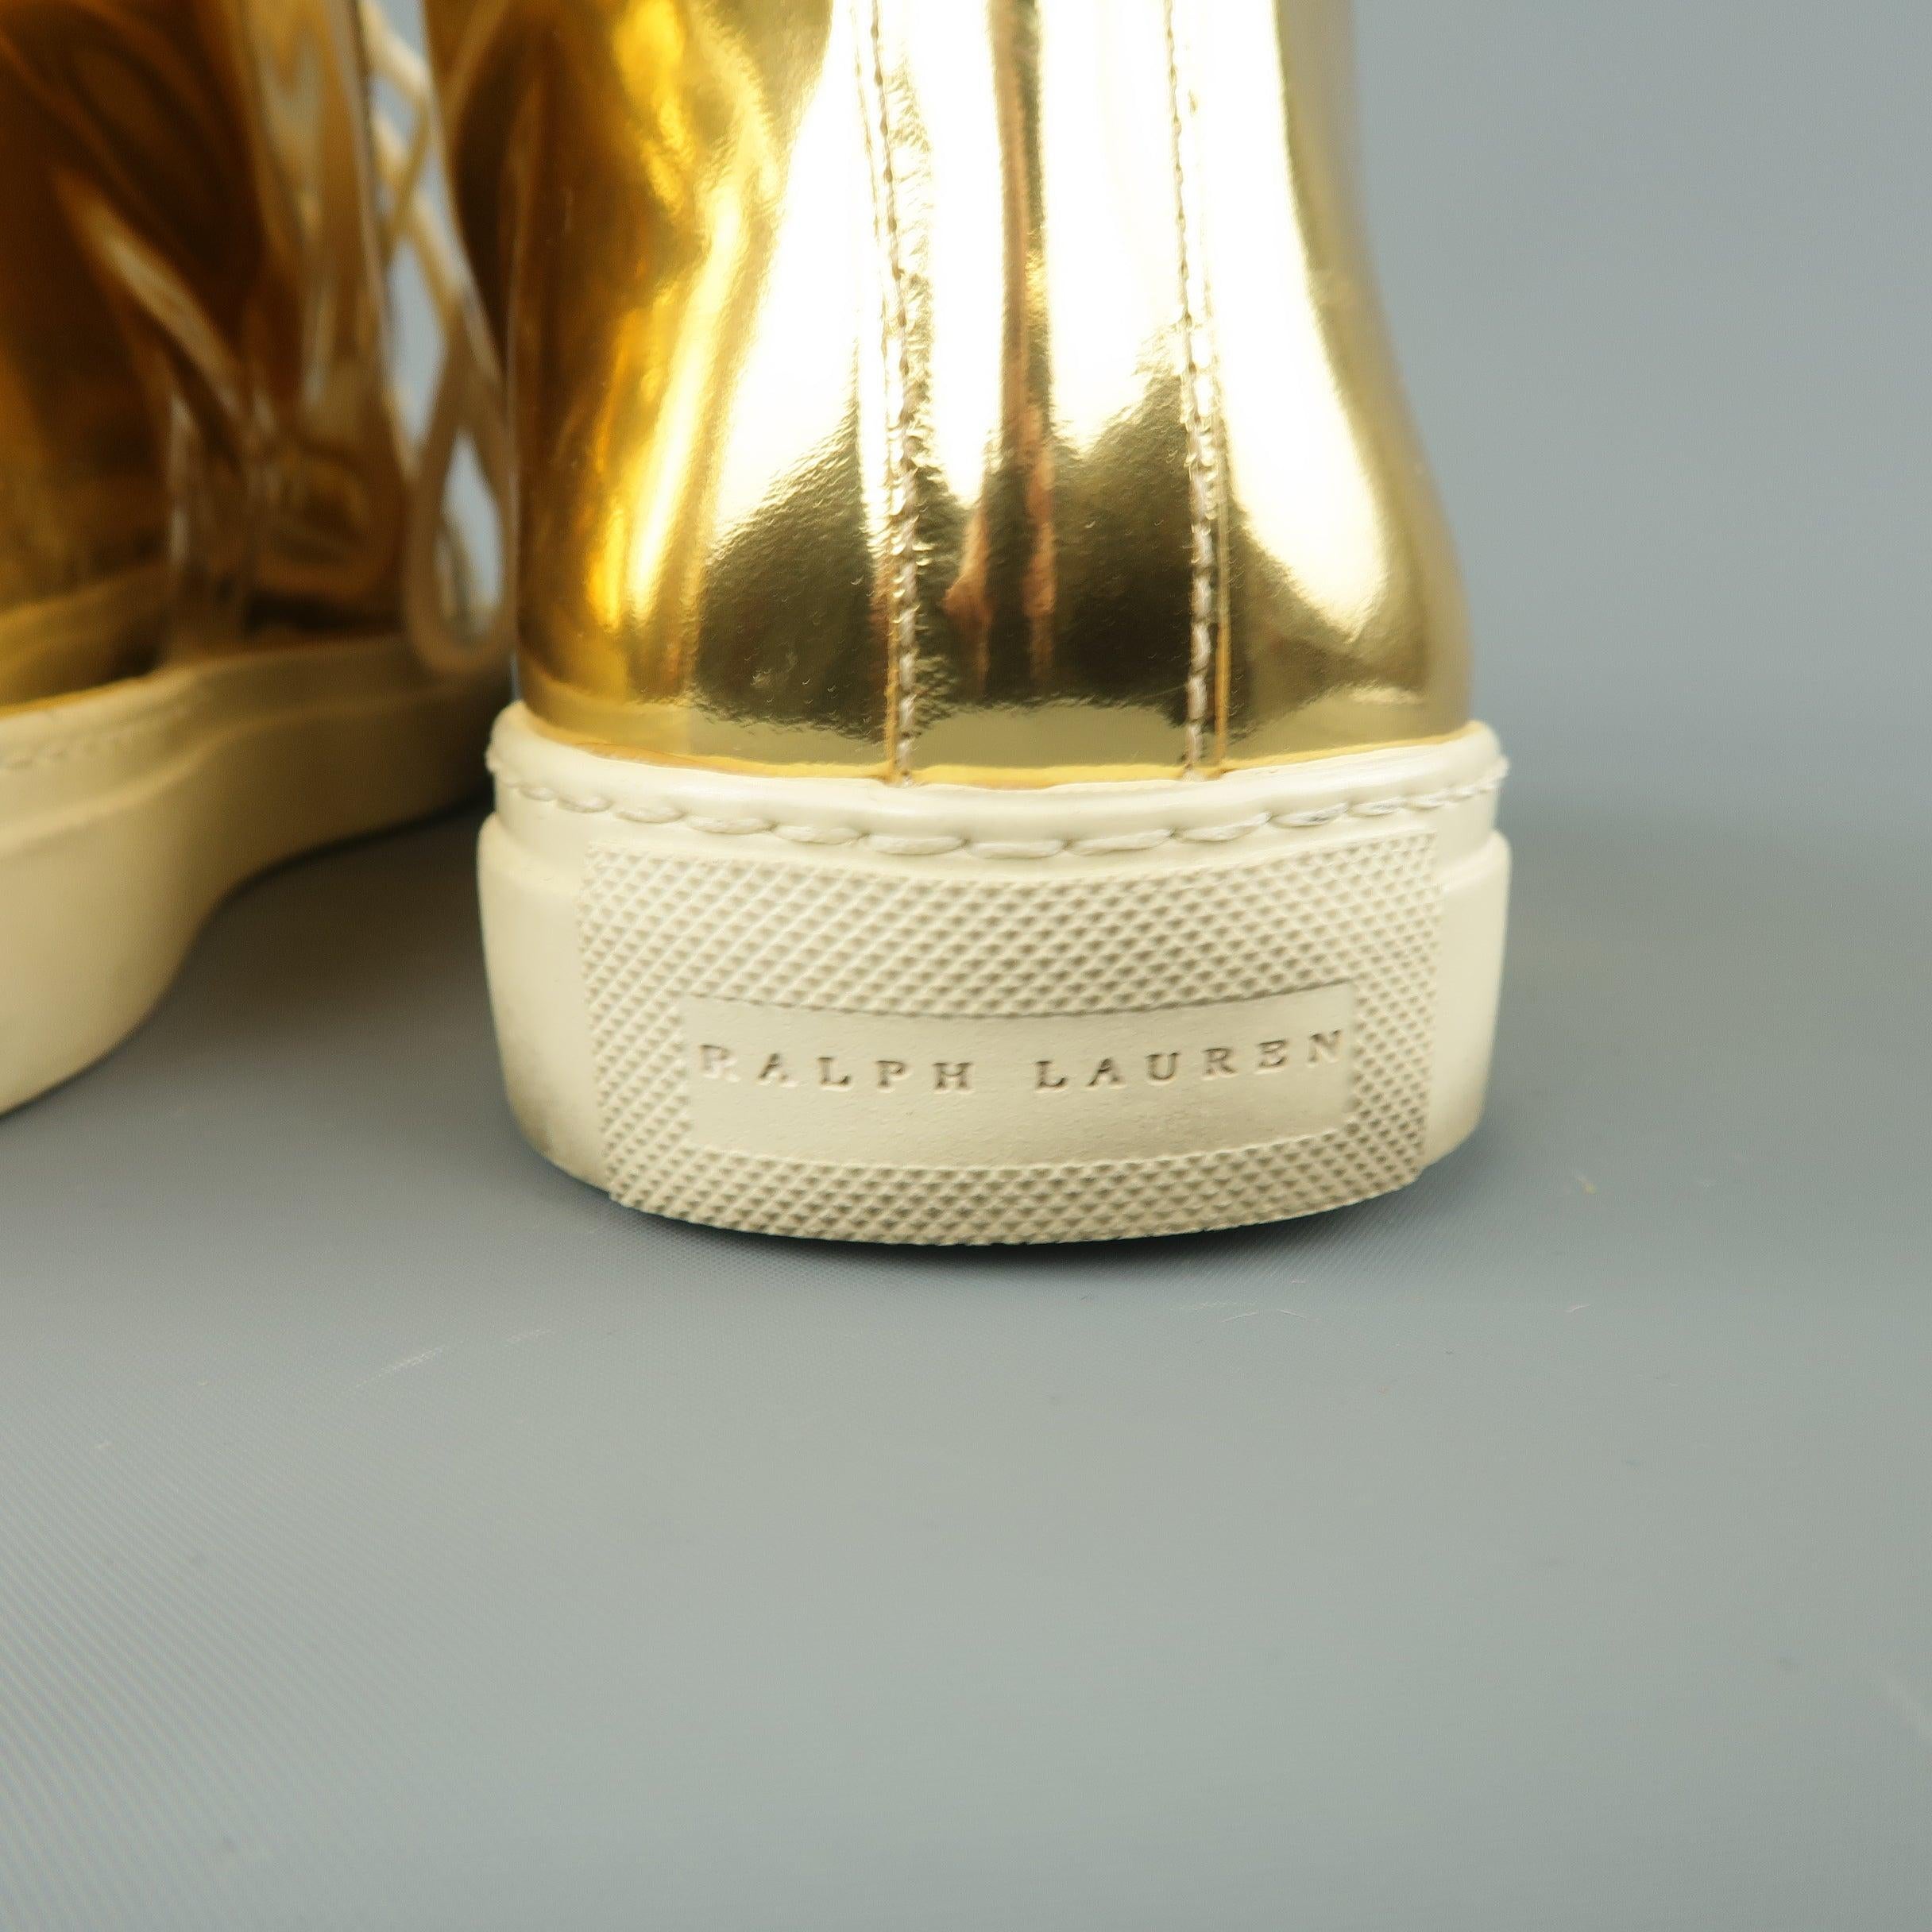 RALPH LAUREN Size 8 Metallic Gold Leather Silvana High Top Sneakers For Sale 2